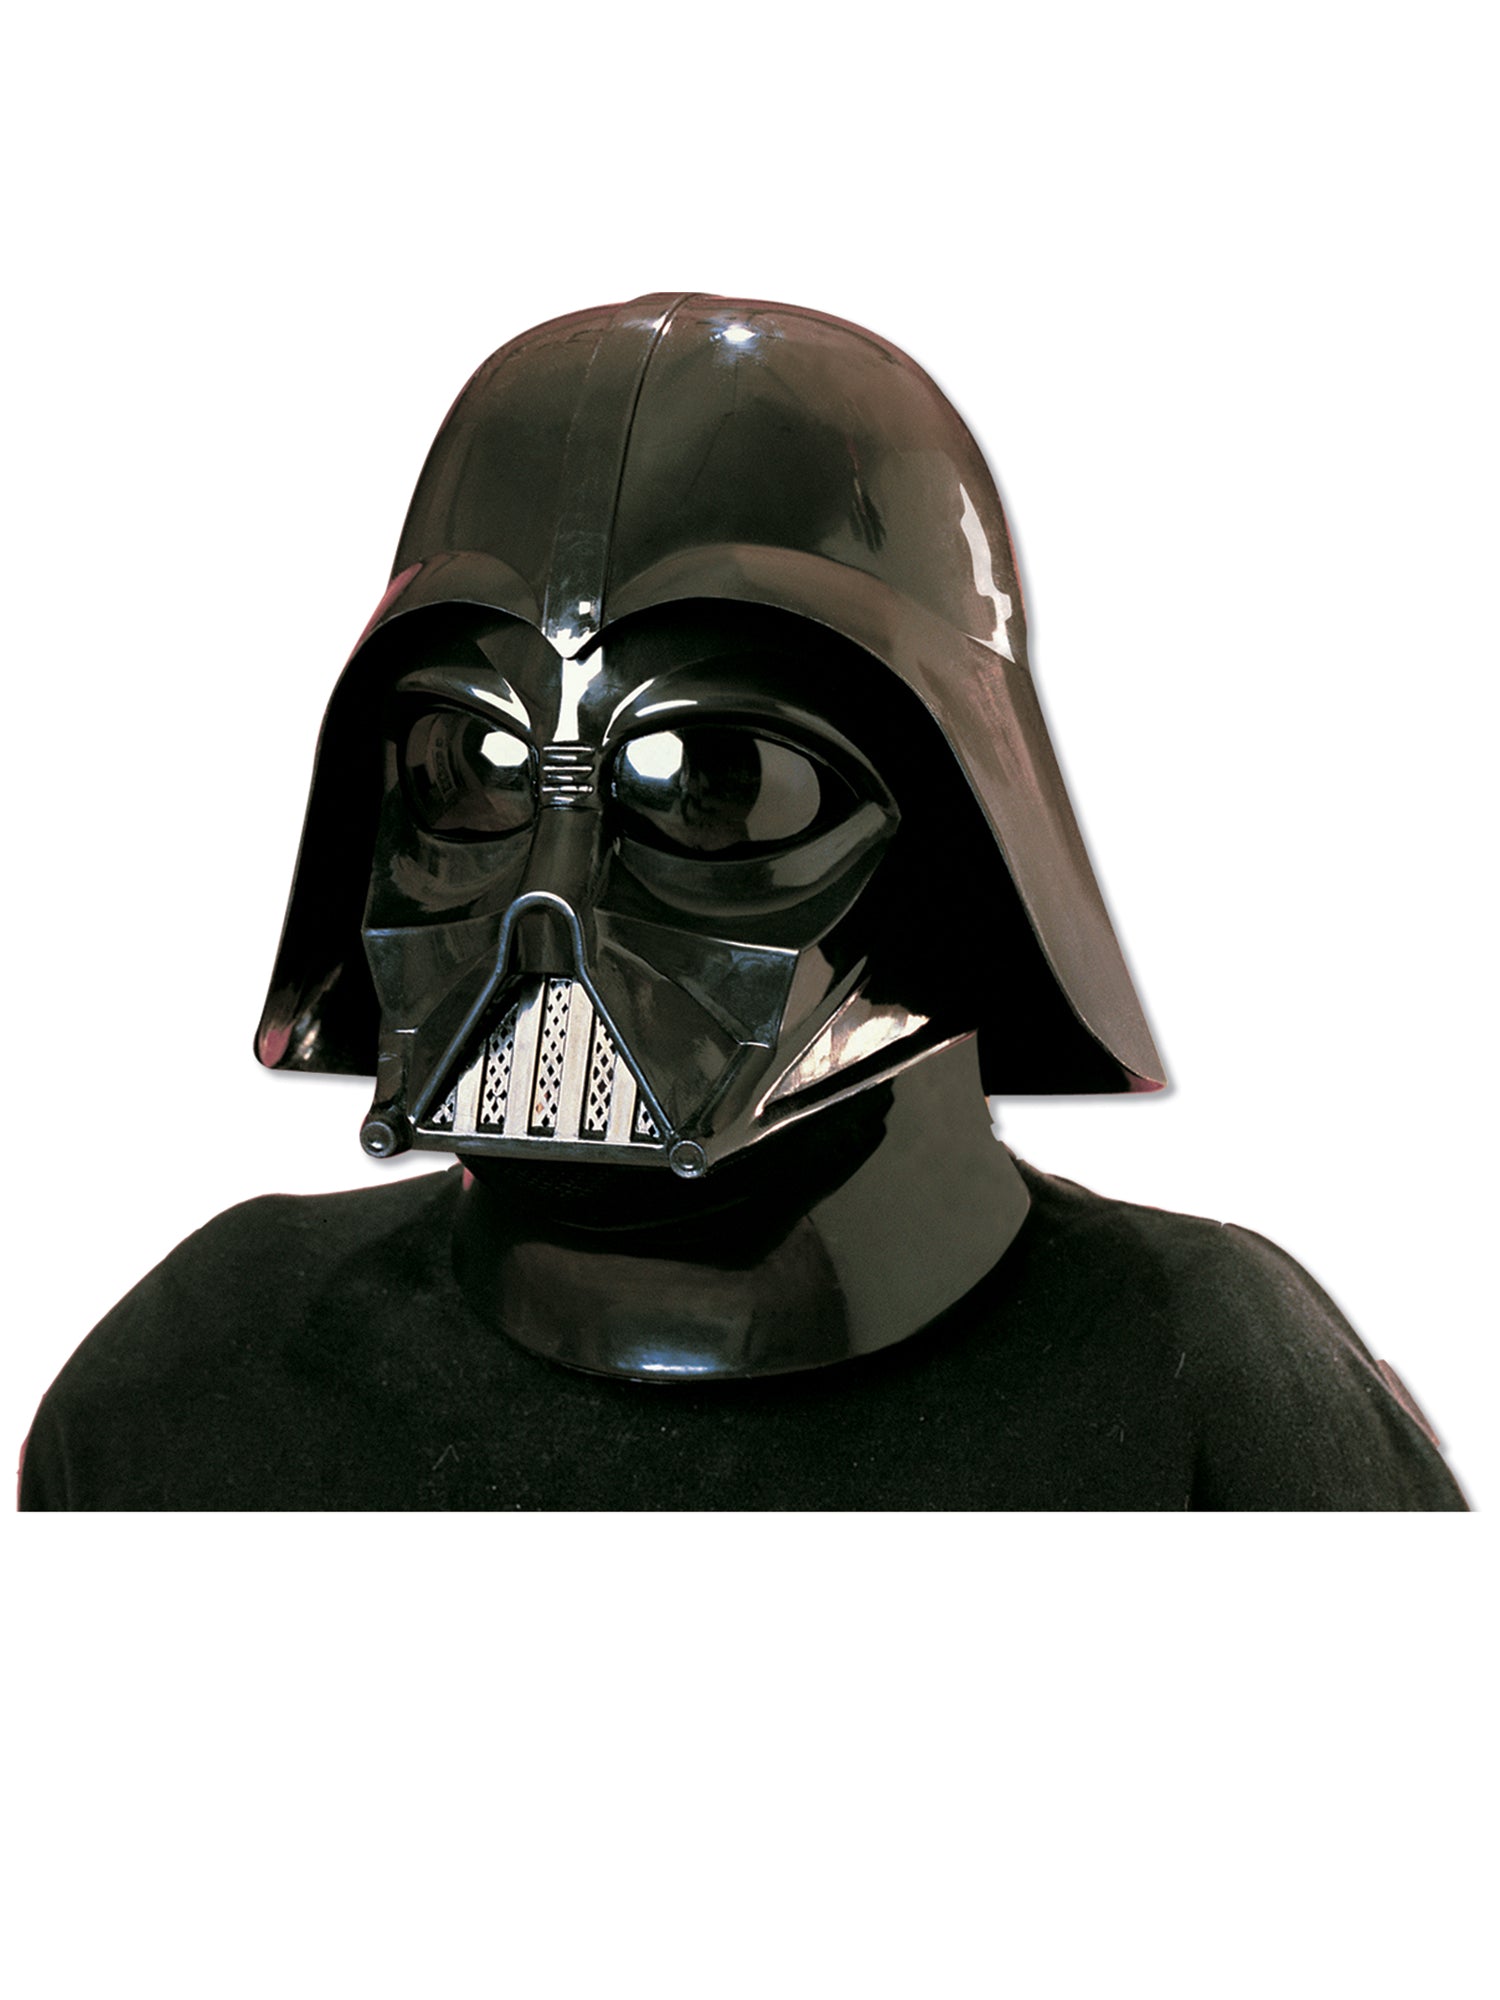 Darth Vader, Revenge Of The Sith, Revenge Of The Sith, Revenge Of The Sith, Multi, Star Wars, Mask, One Size, Front